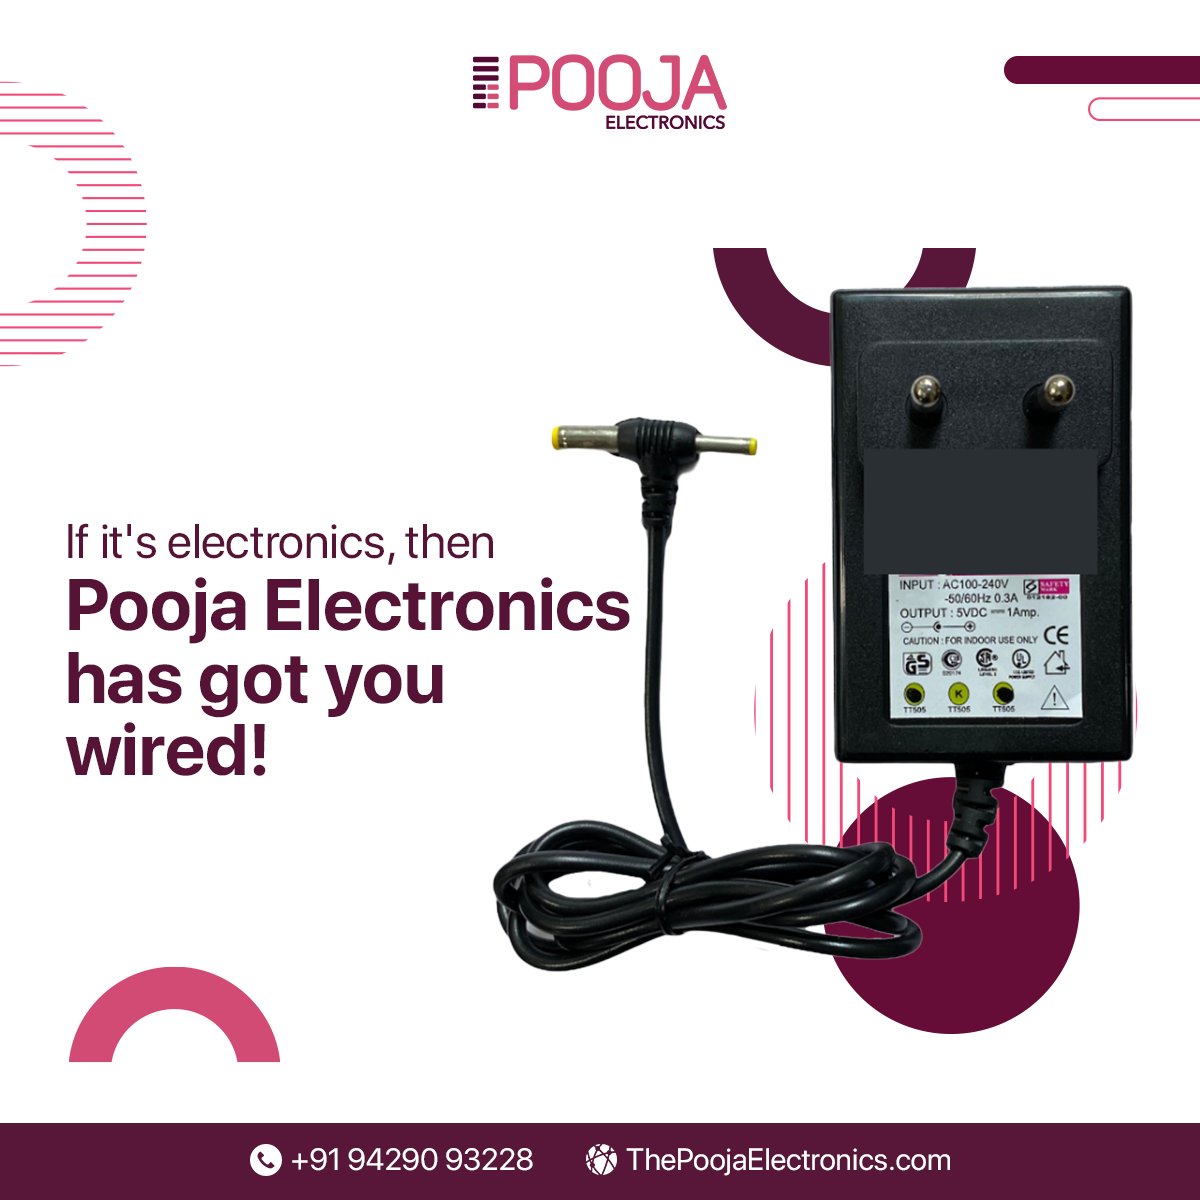 Don't let faulty wiring bring you down, our repair service has you covered.
.
#poojaelectronics #WireRepair #ElectricalRepair #ElectricalIssues #HomeMaintenance #HomeRepair #HomeElectrical #HomeWiring #ResidentialElectrician #electronicitems #ExpertRepairs #QualityService